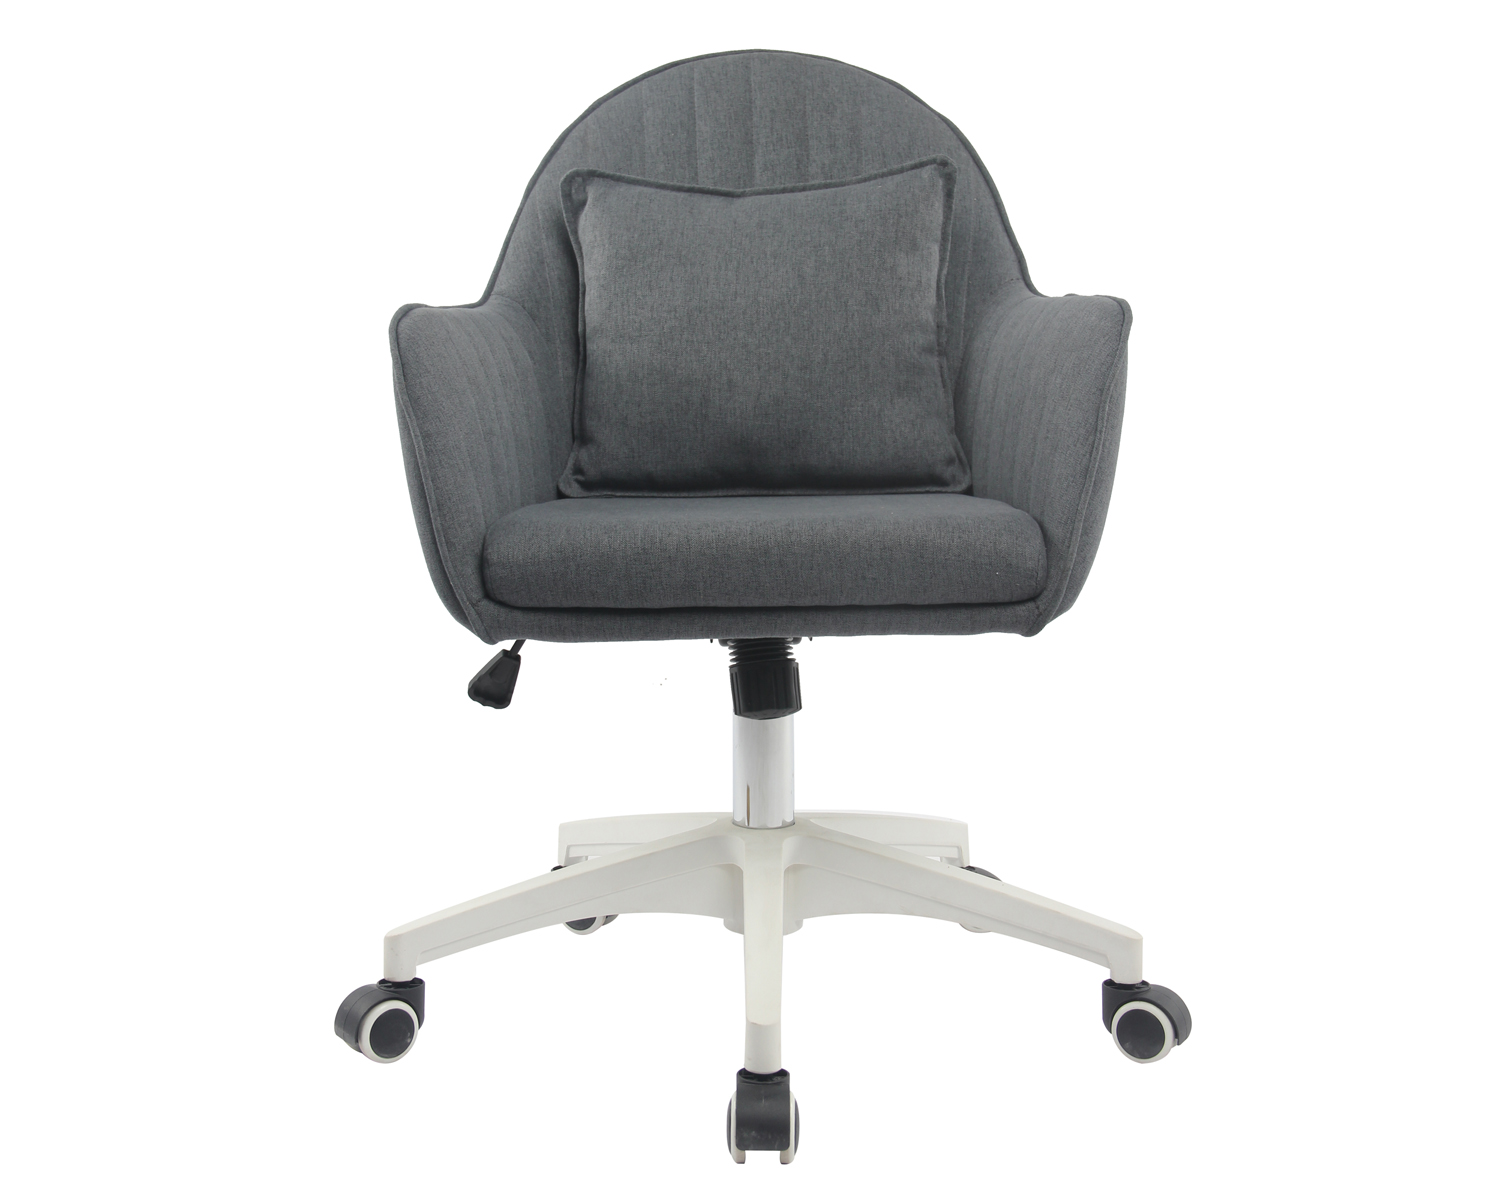 Home Office Chair with Good Foam, Height-Adjustable Desk Accent Chair with Matt -Black – Base, Twill Fabric, Light Gray Featured Image